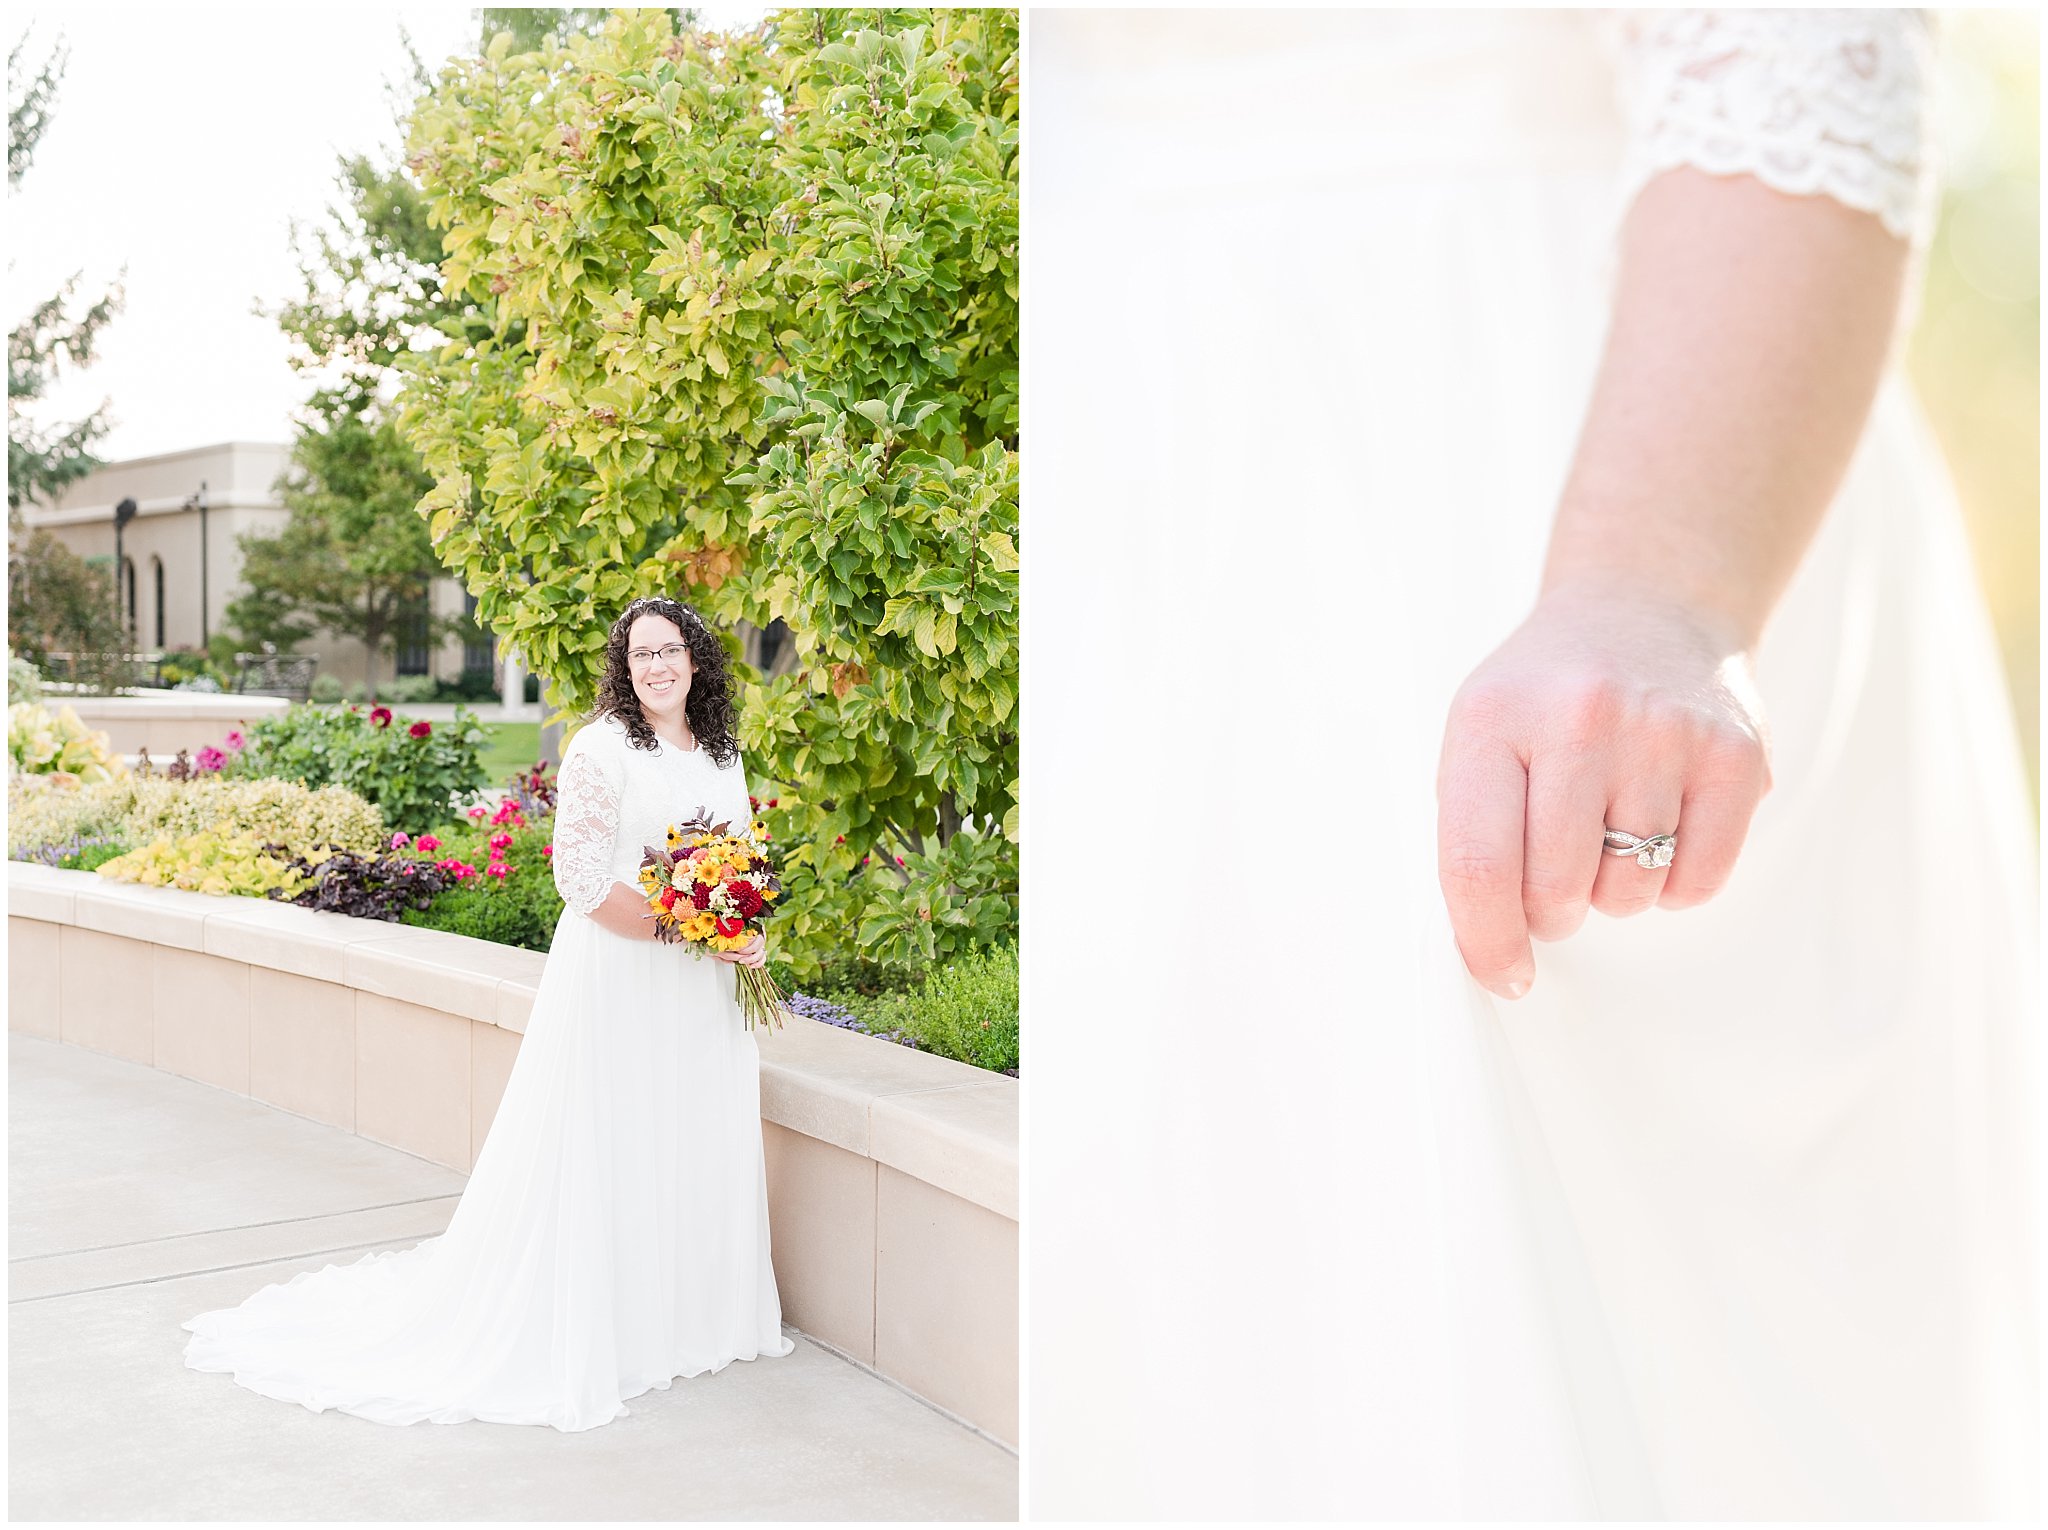 GroomBride in simple lace sleeve wedding dress with fall bouquet | Logan Temple Fall Formal Session | Jessie and Dallin Photography